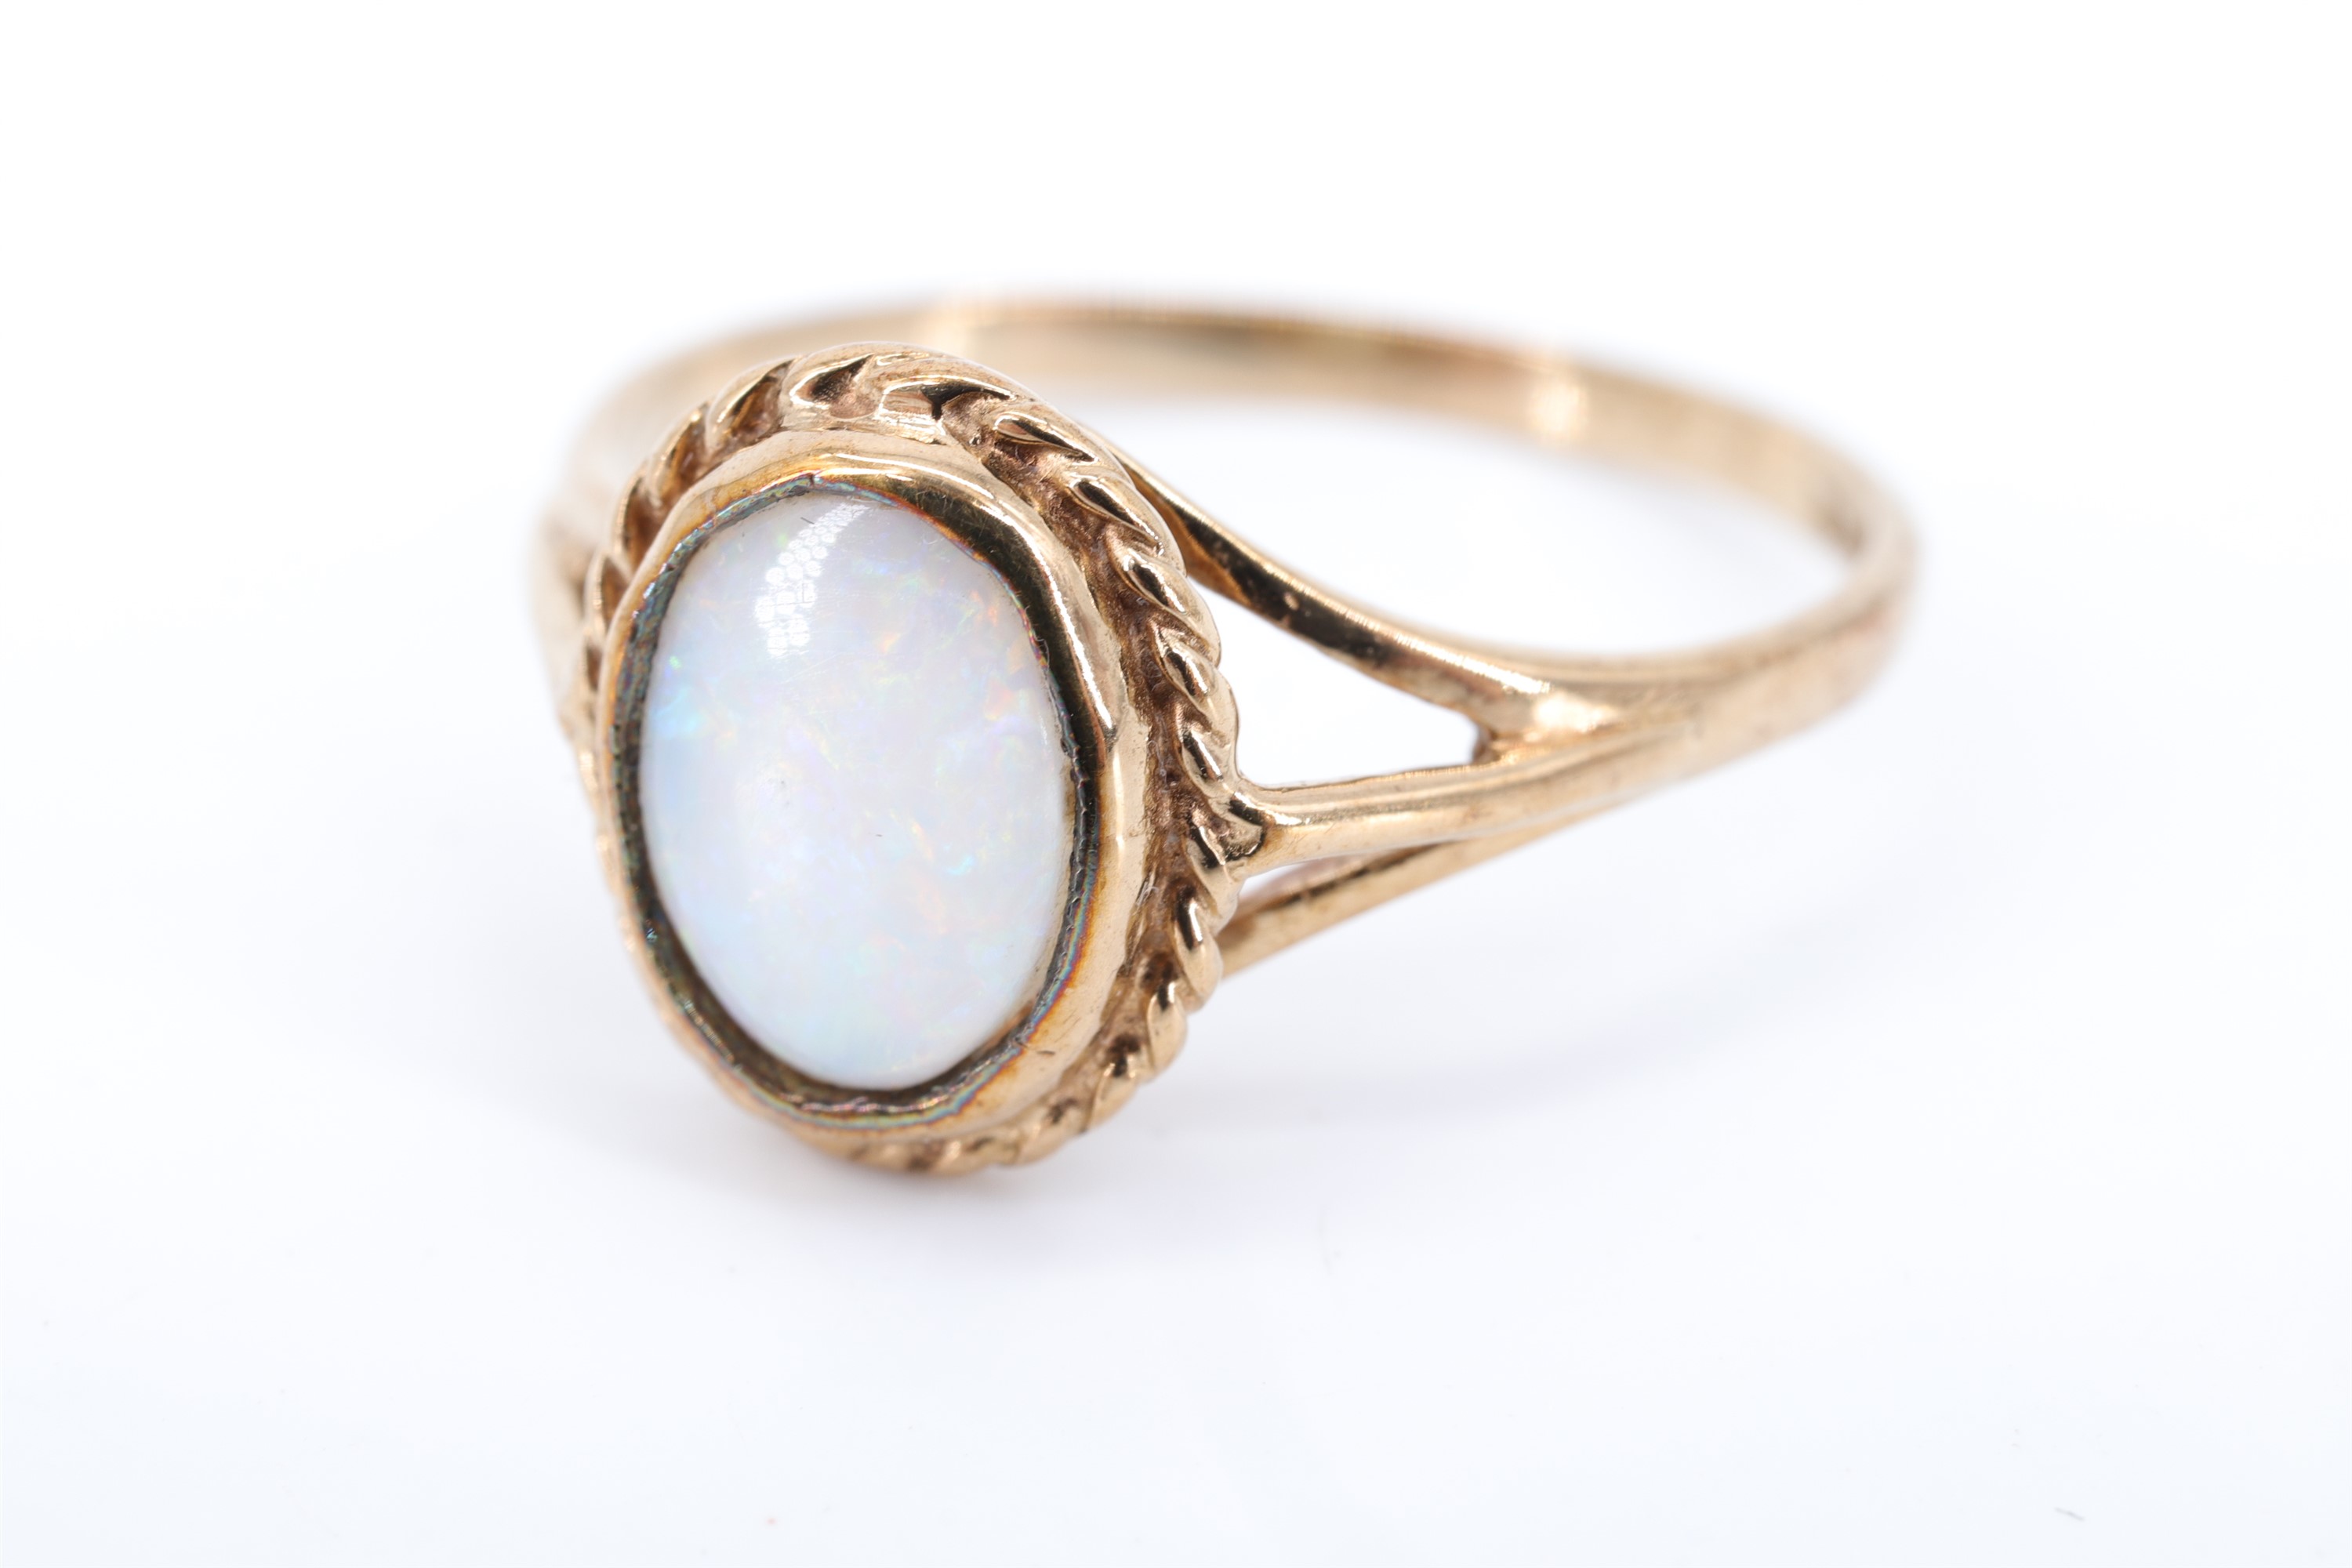 A lady's opal and 9 ct gold finger ring, having an oval opal in a rubbed over setting within a